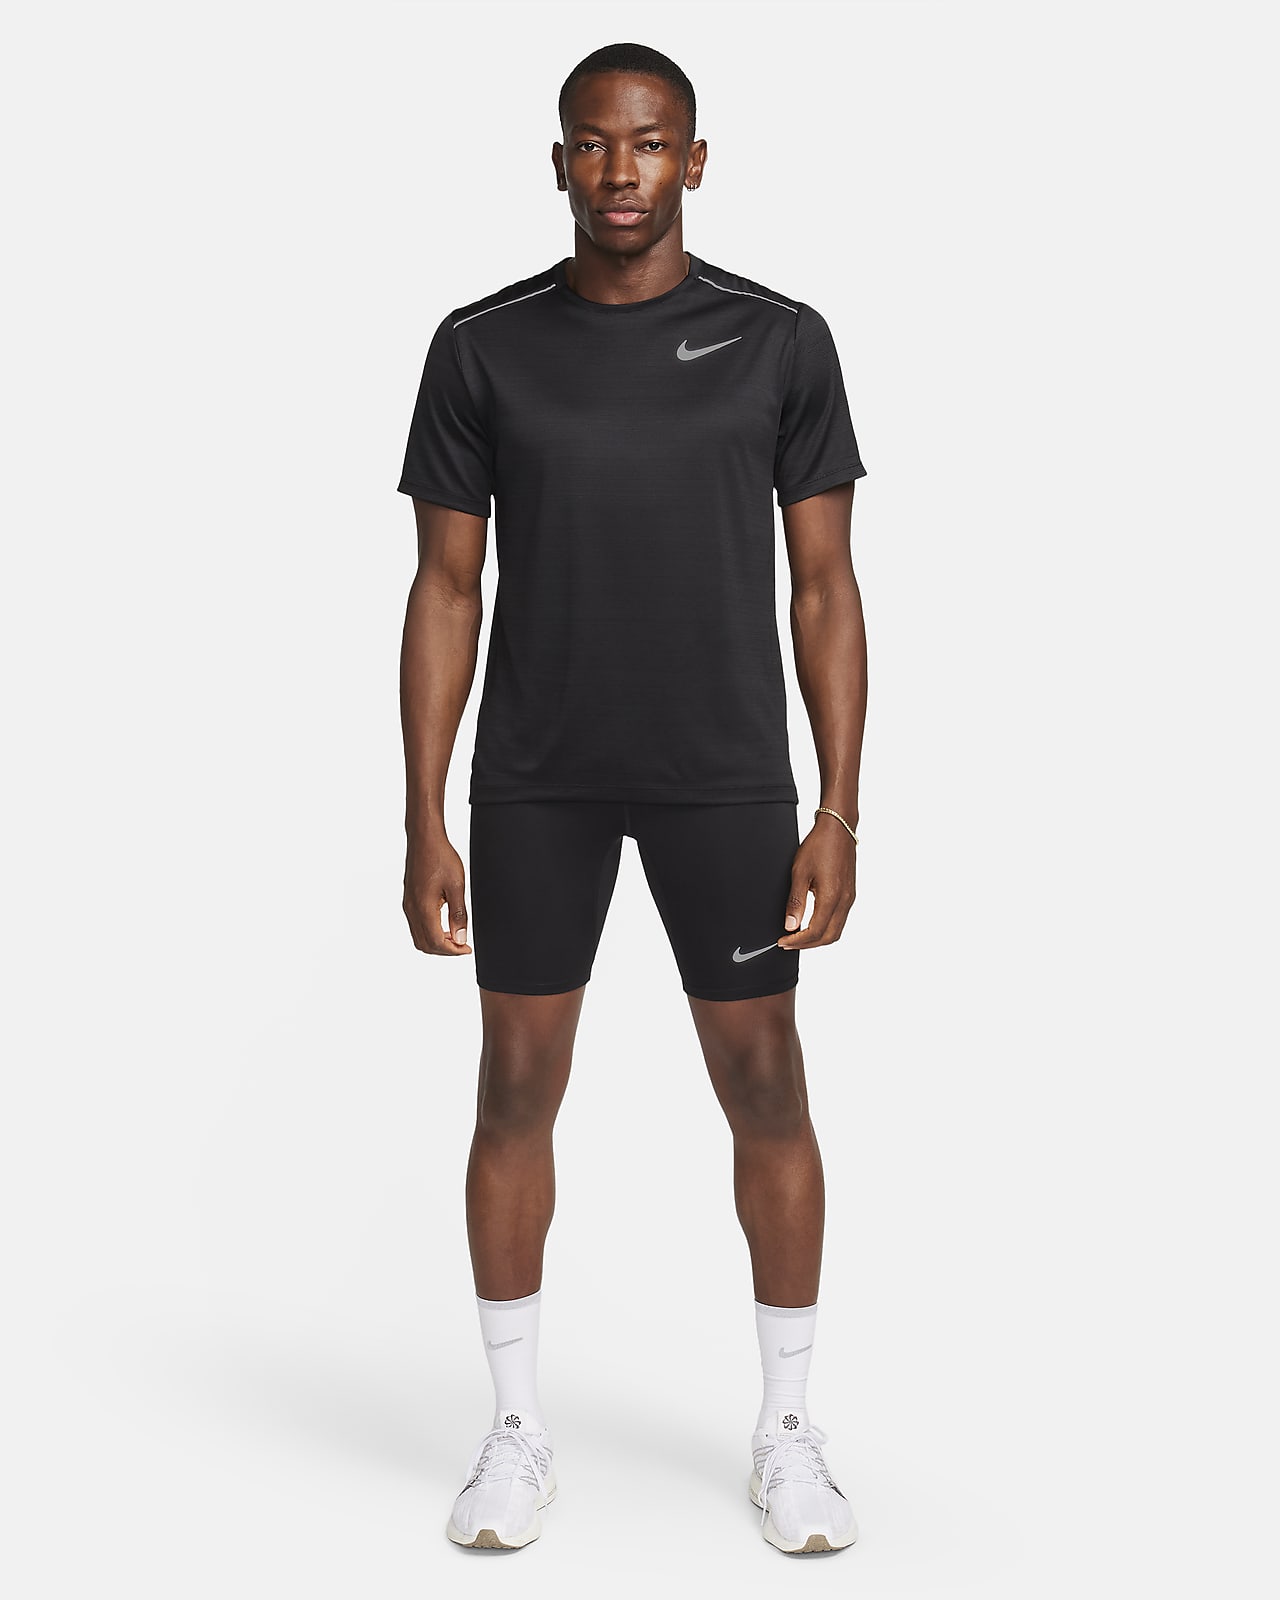 https://static.nike.com/a/images/t_PDP_1280_v1/f_auto,q_auto:eco/8d0a8da7-cbe9-42be-b237-a33cfe32bba6/fast-dri-fit-brief-lined-running-1-2-length-tights-JxznpD.png